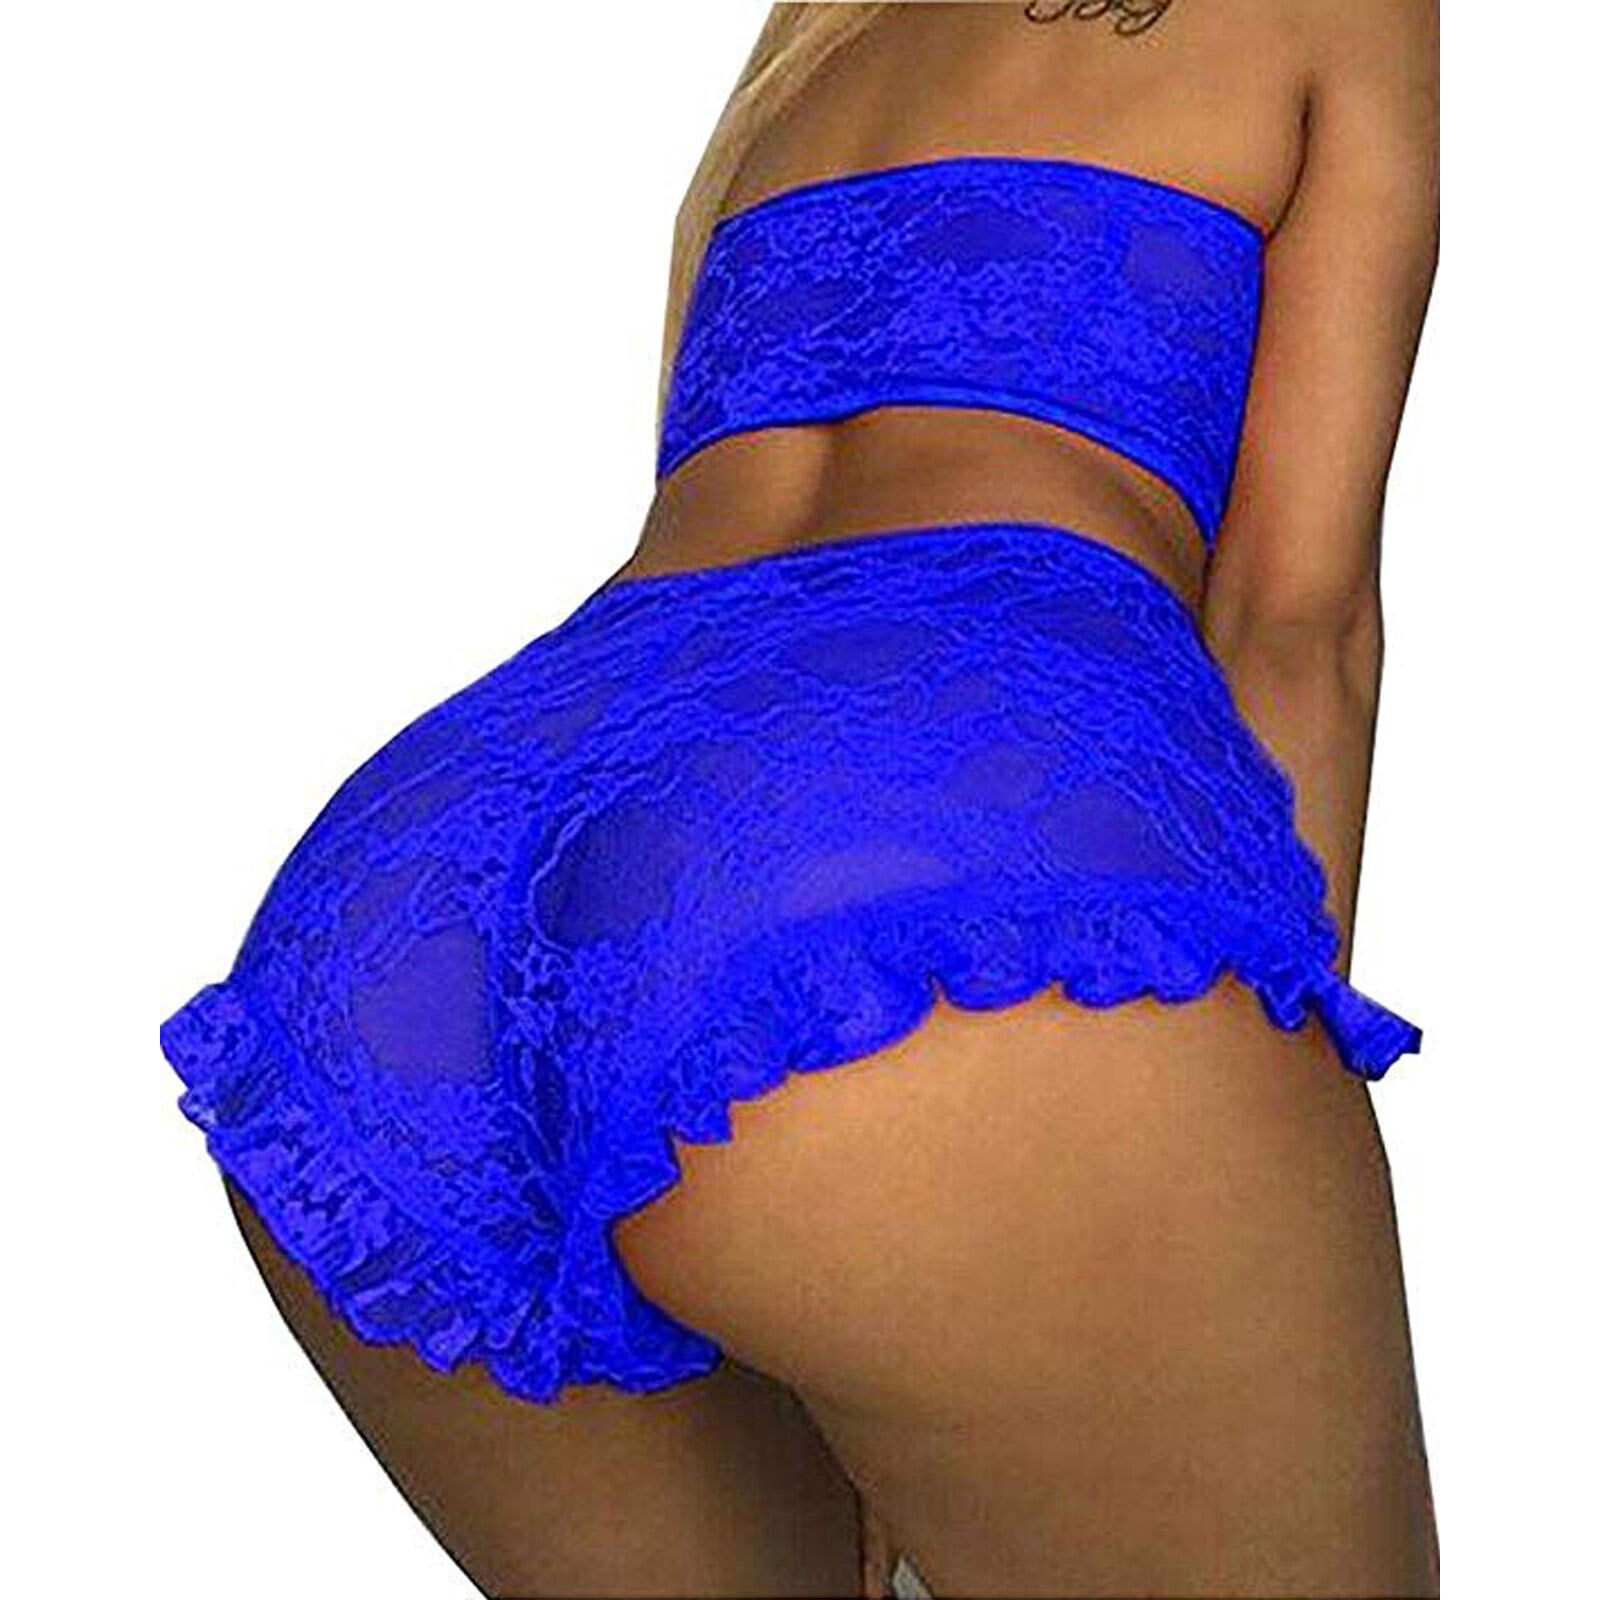 Mlqidk Women's Mesh Sheer See Through Lingerie Set Sexy Lace Bra and Panty  2 Piece